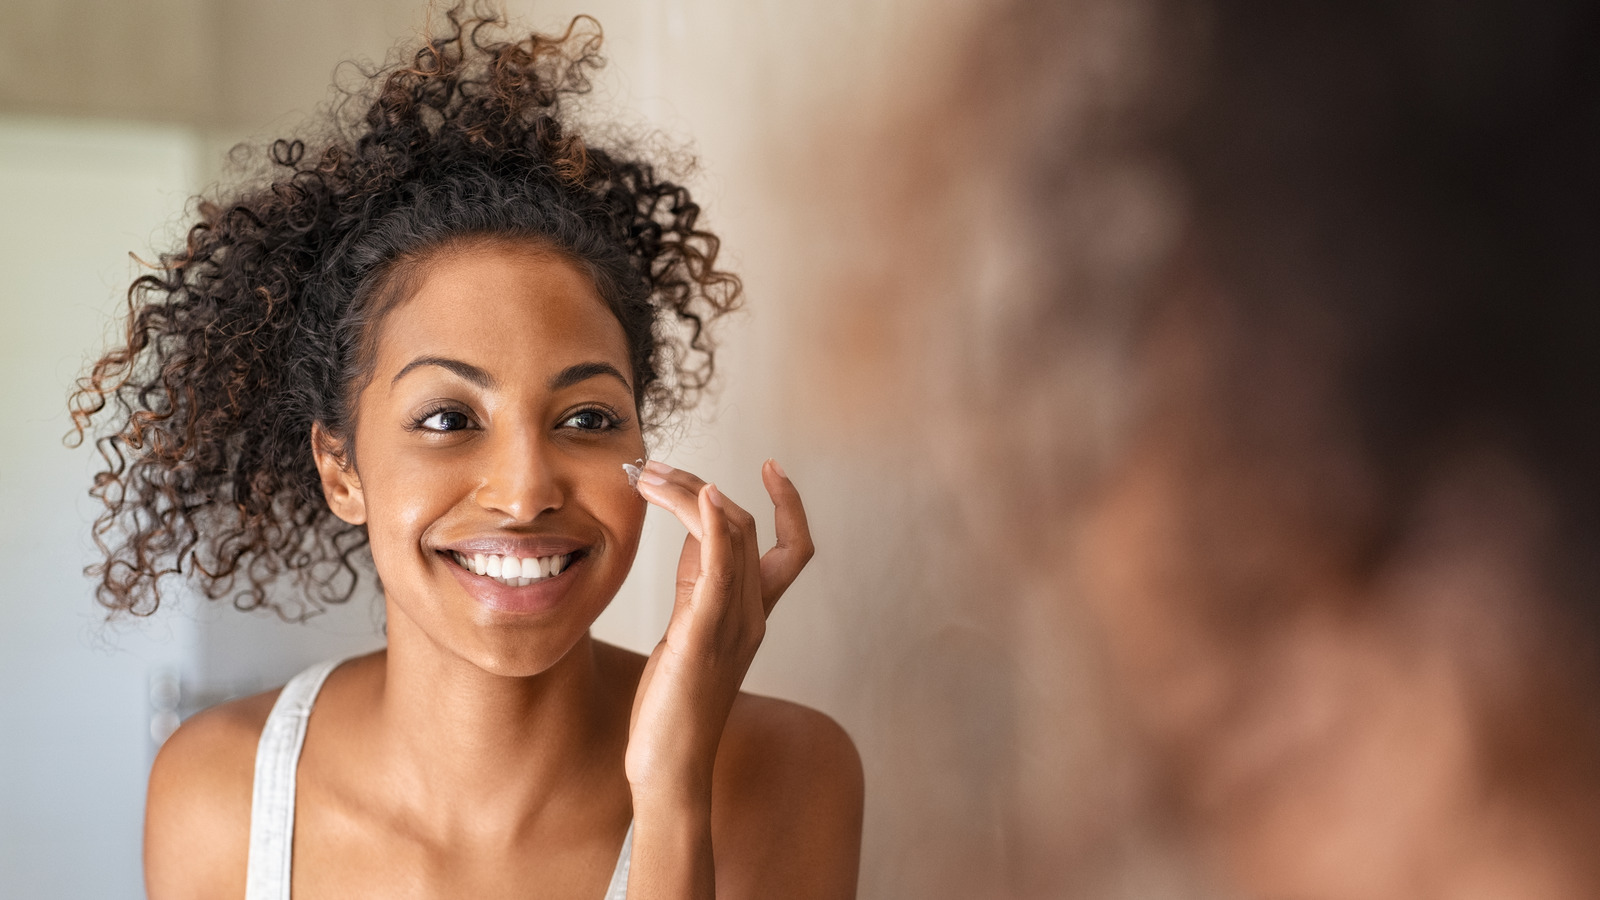 Tiktok Skincare Trends You Should Start Thinking Twice About